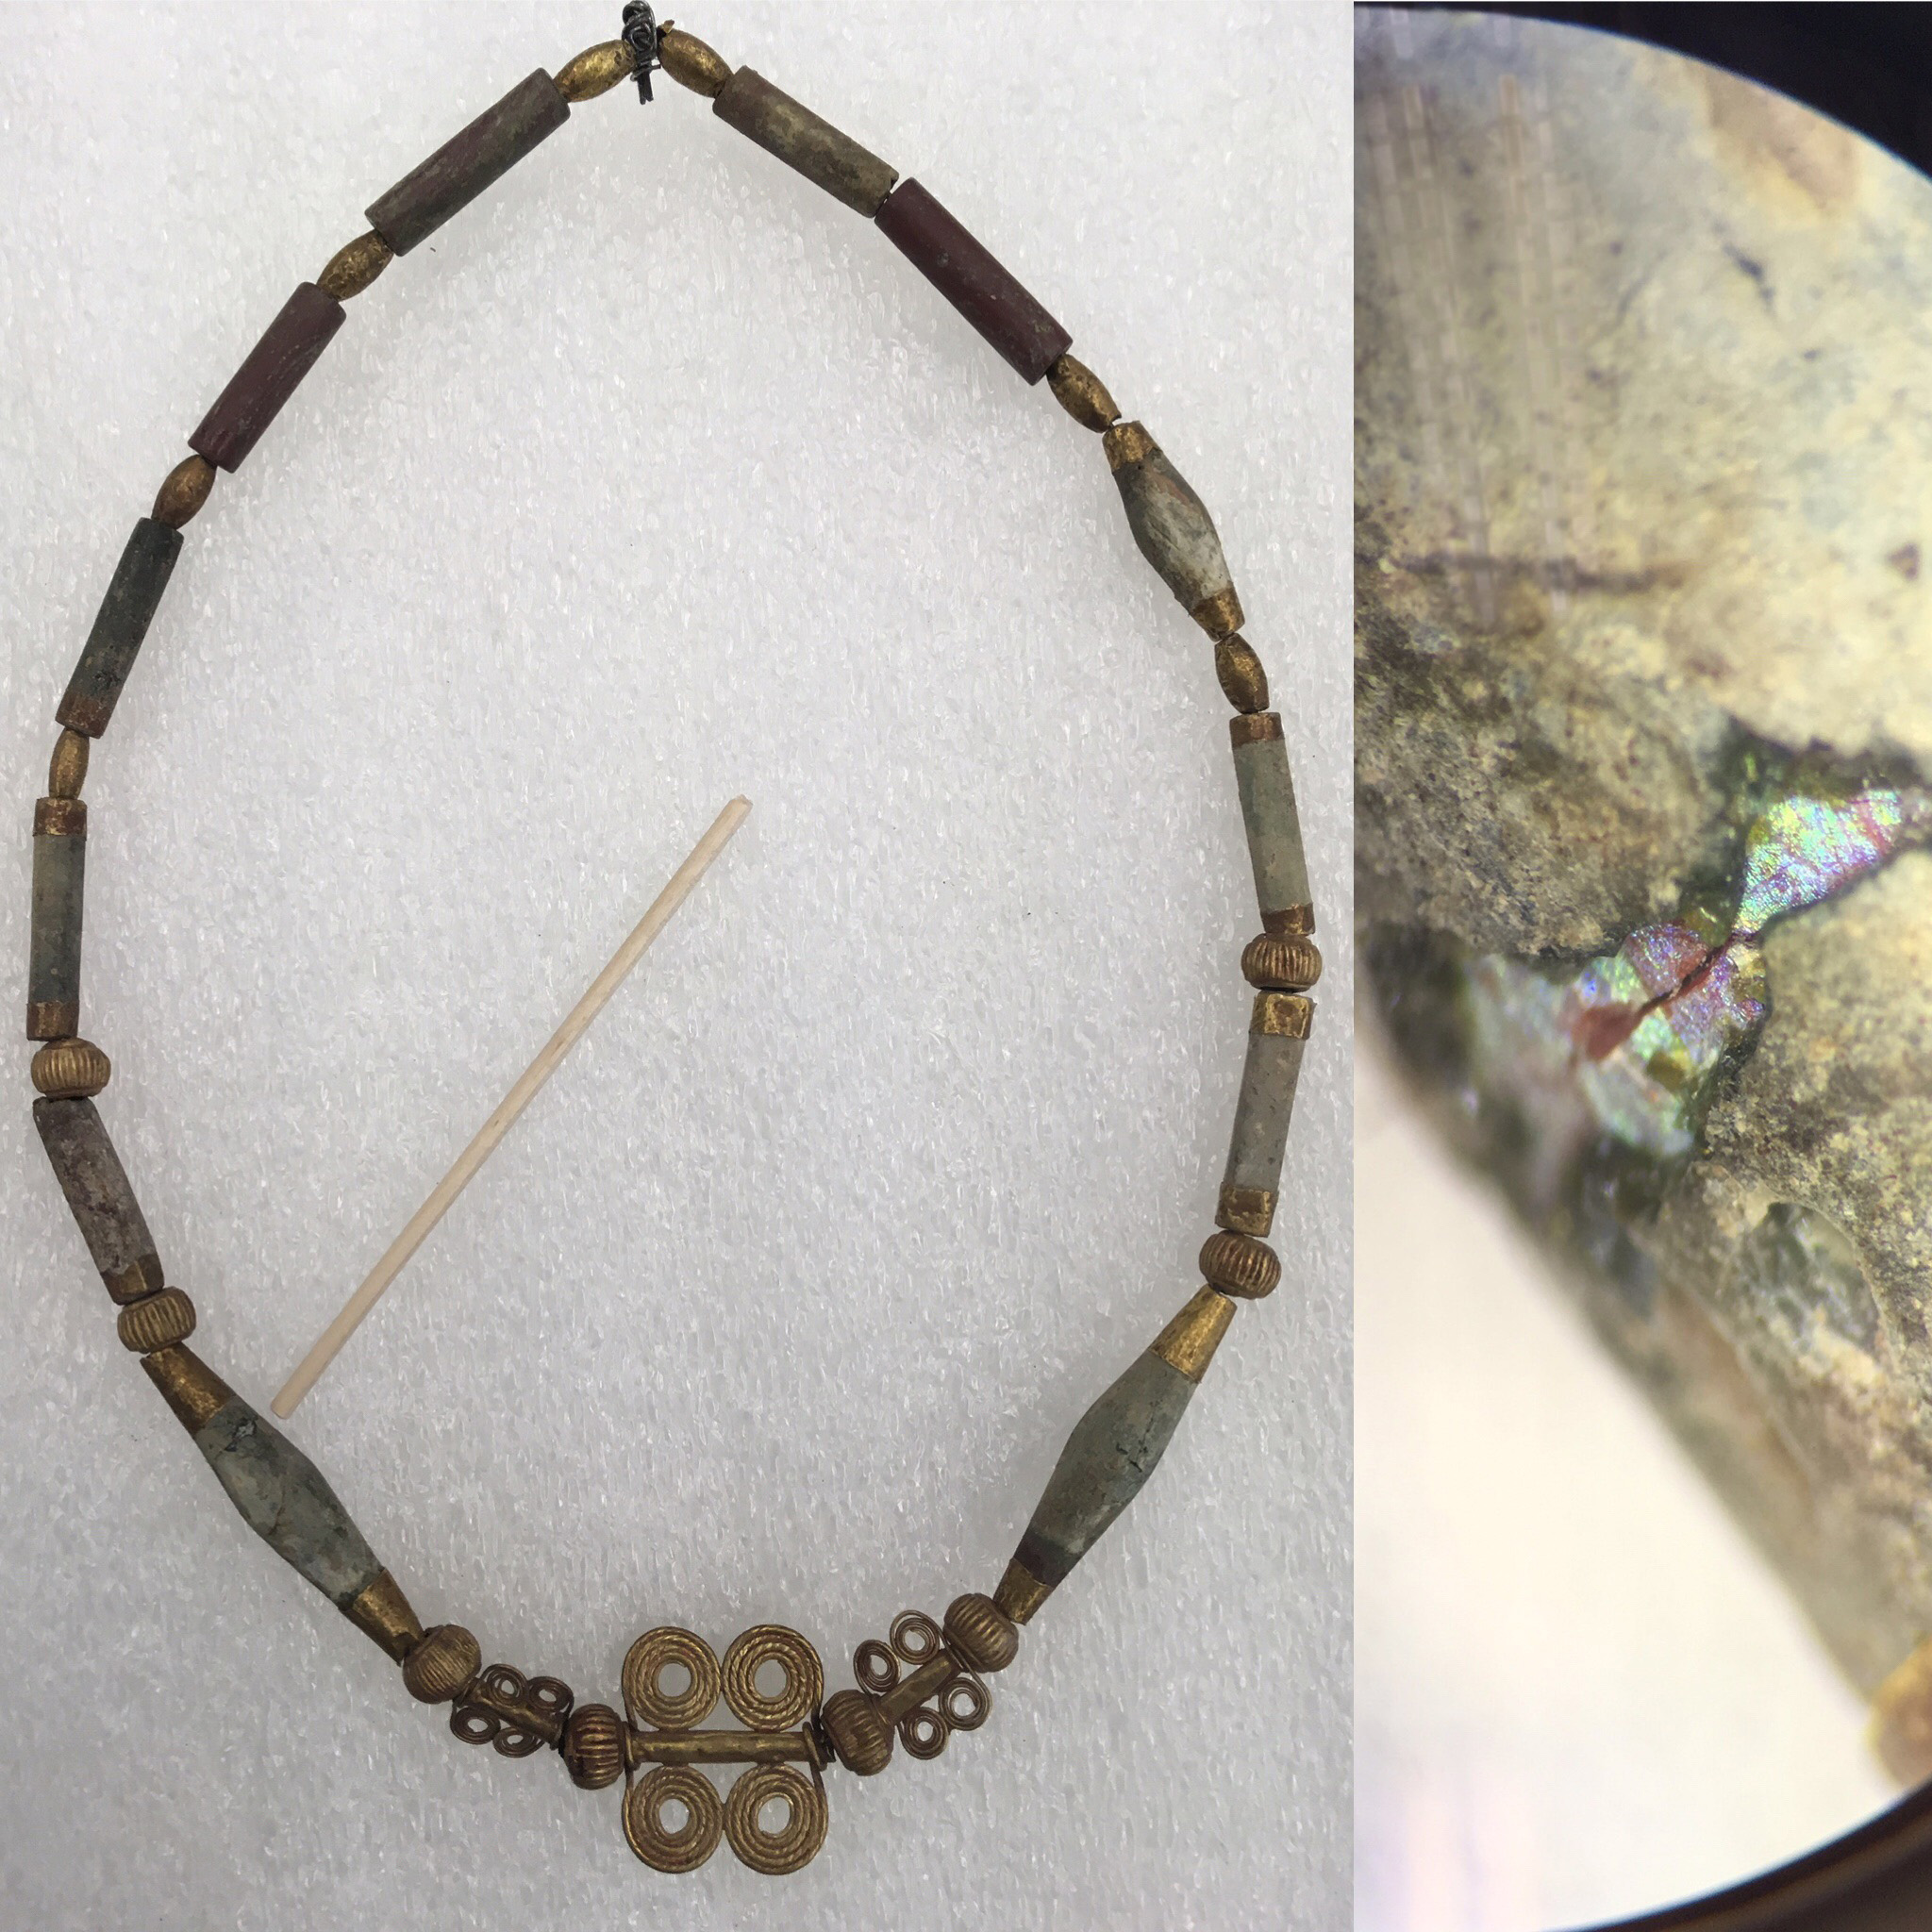 Necklace in conservation process